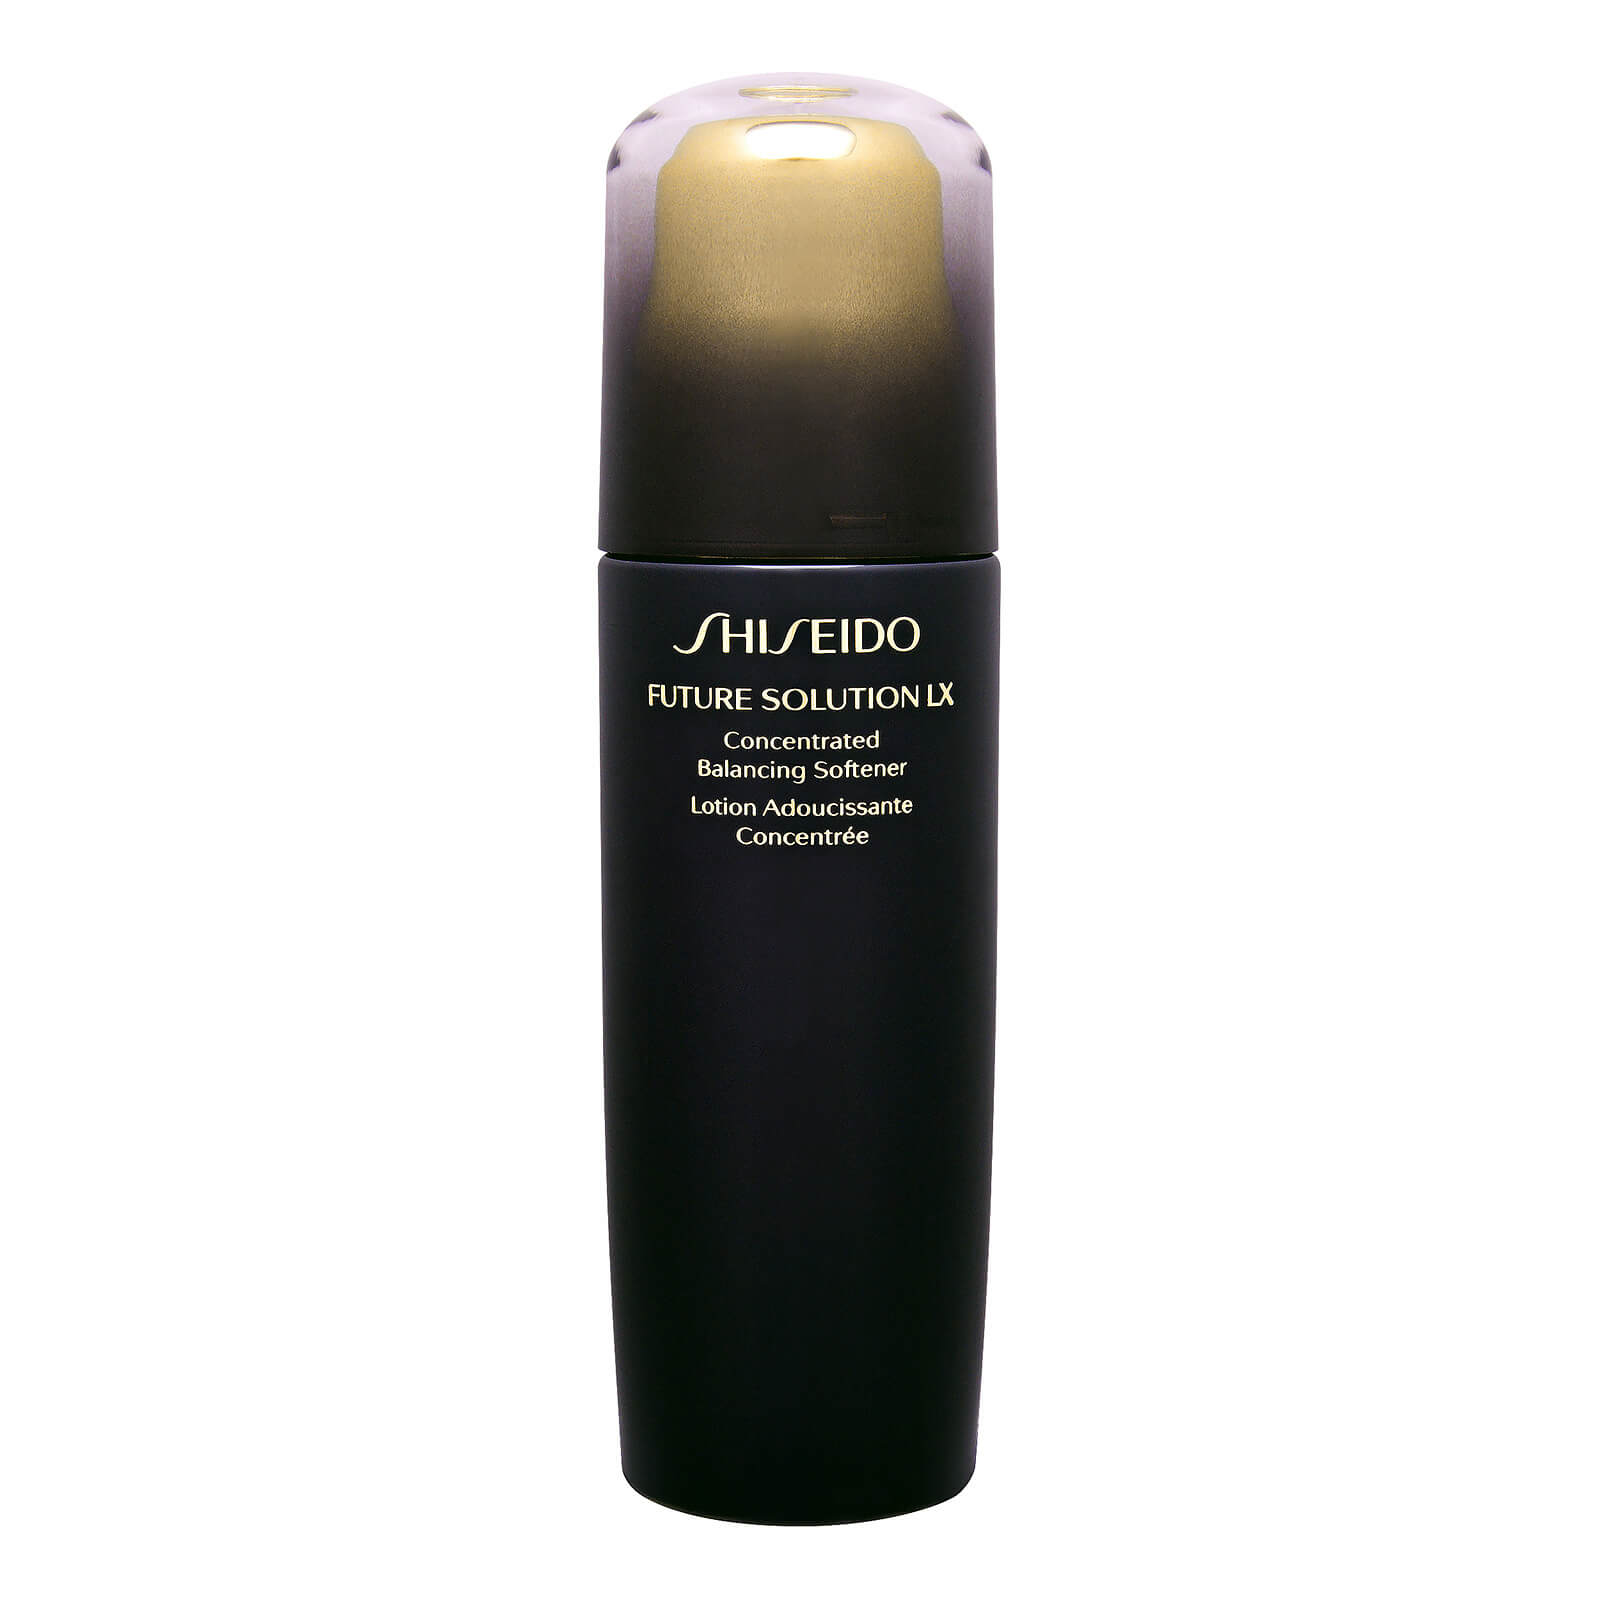 Future Solution LX Concentrated Balancing Softener E